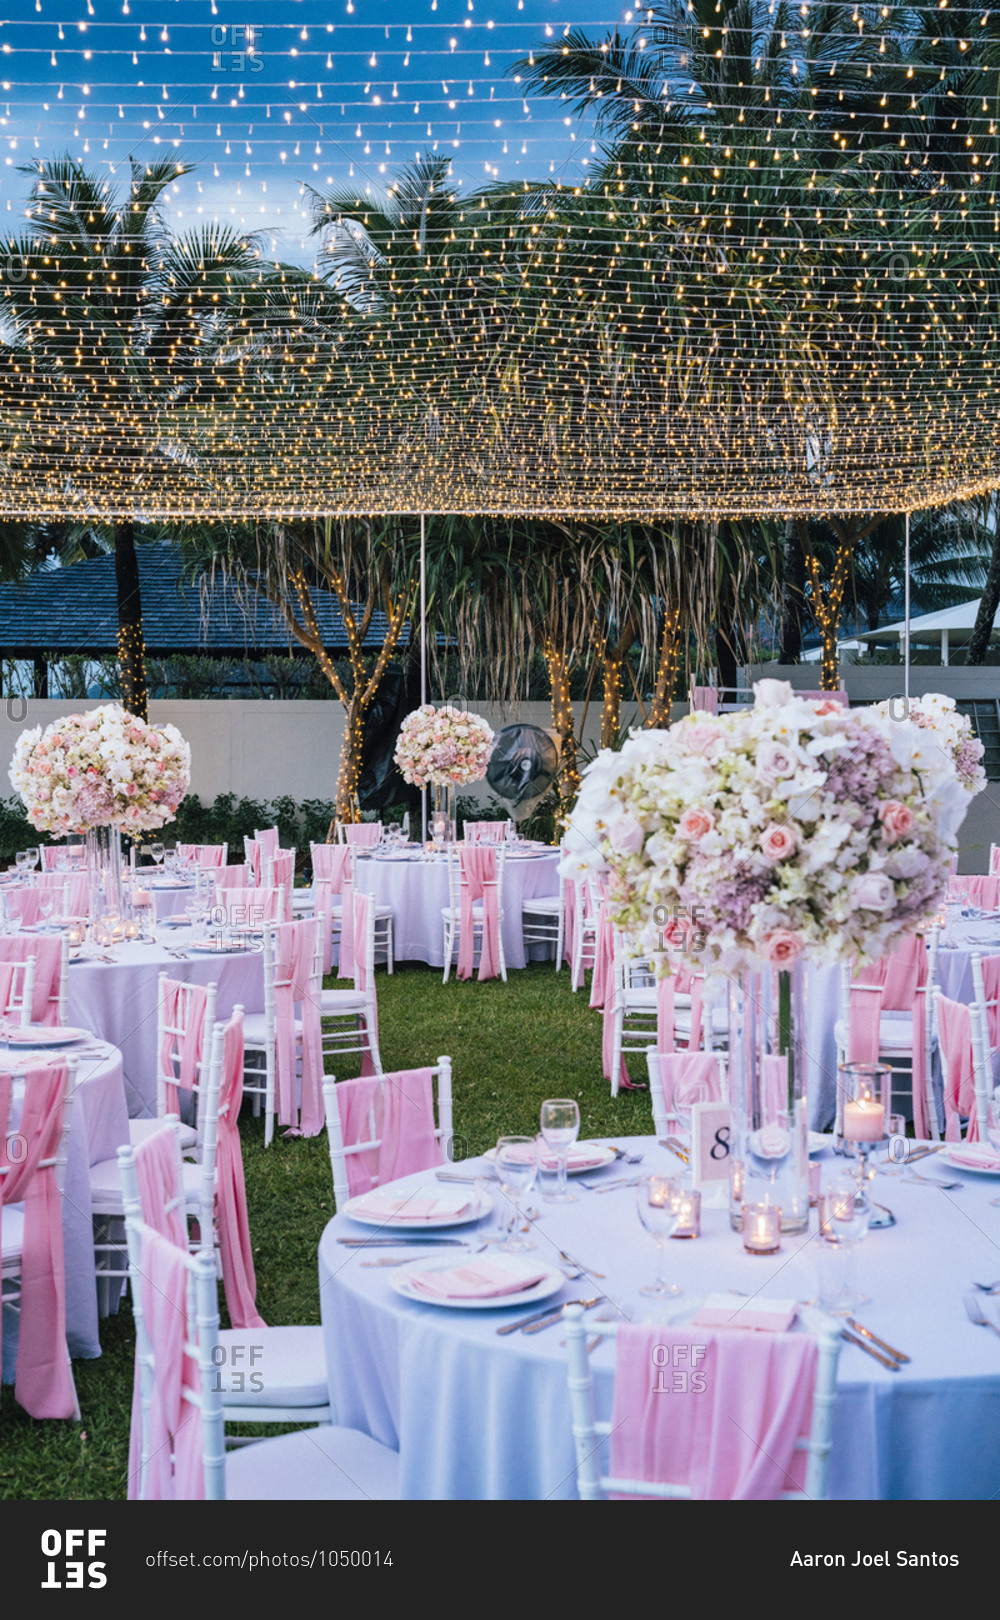 Tables at an outdoor wedding reception at dusk with fairy lights